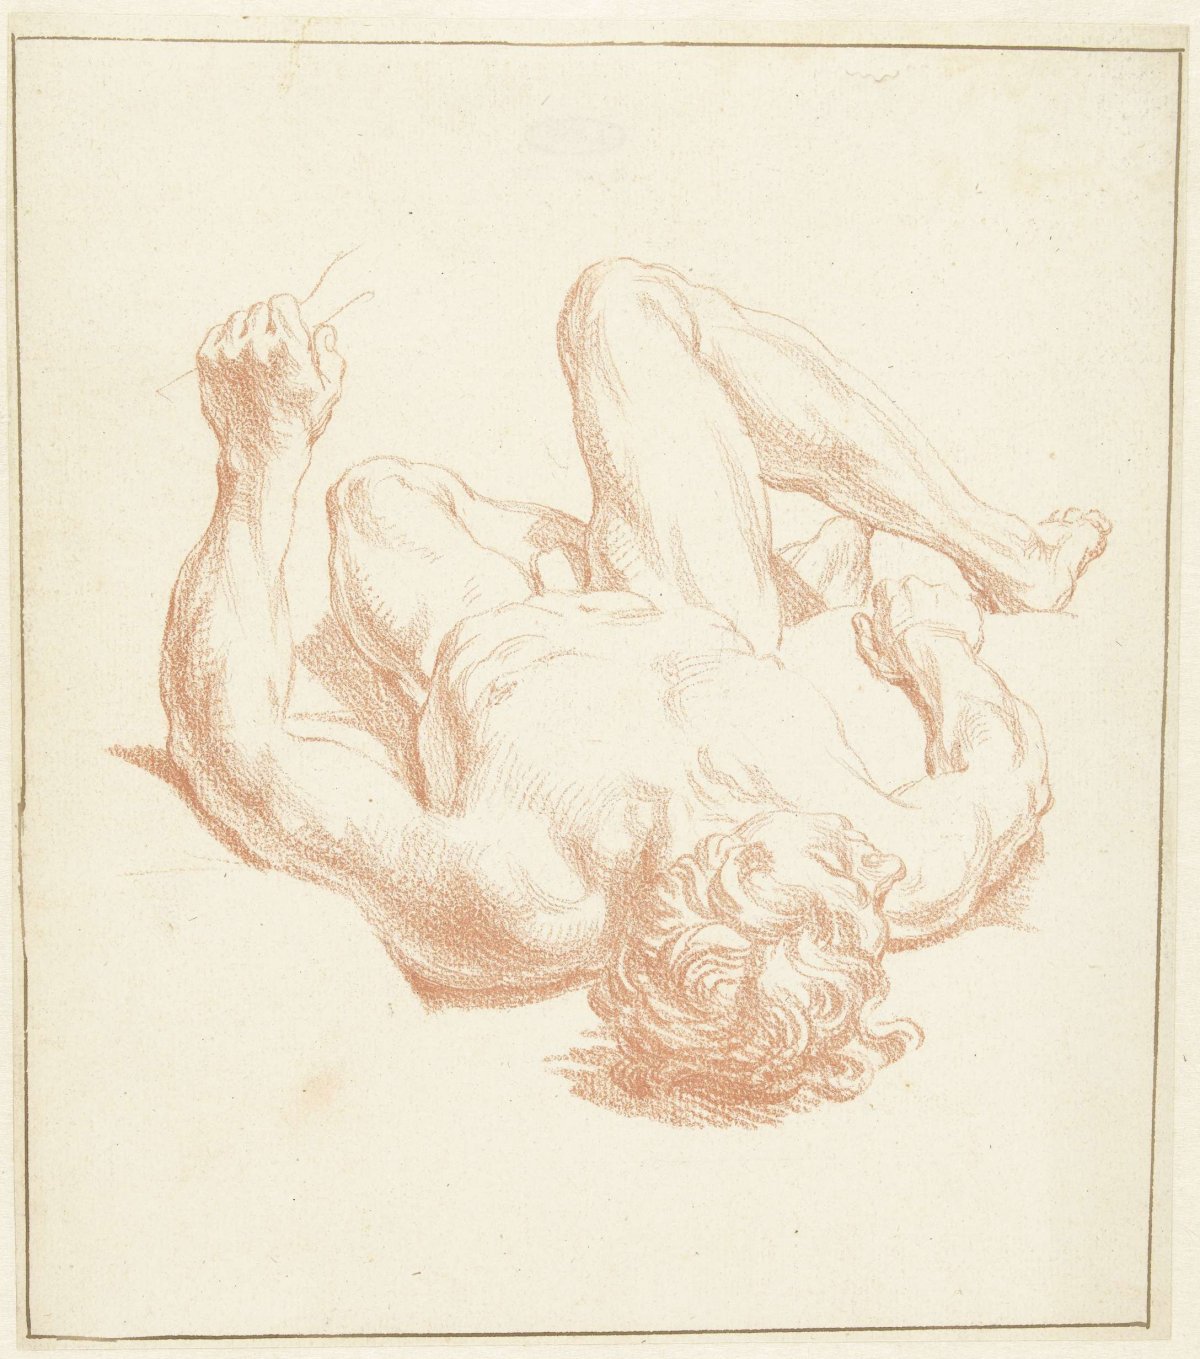 Study of male nude, lying on back, shown in abbreviated form, Louis Fabritius Dubourg, 1703 - 1775